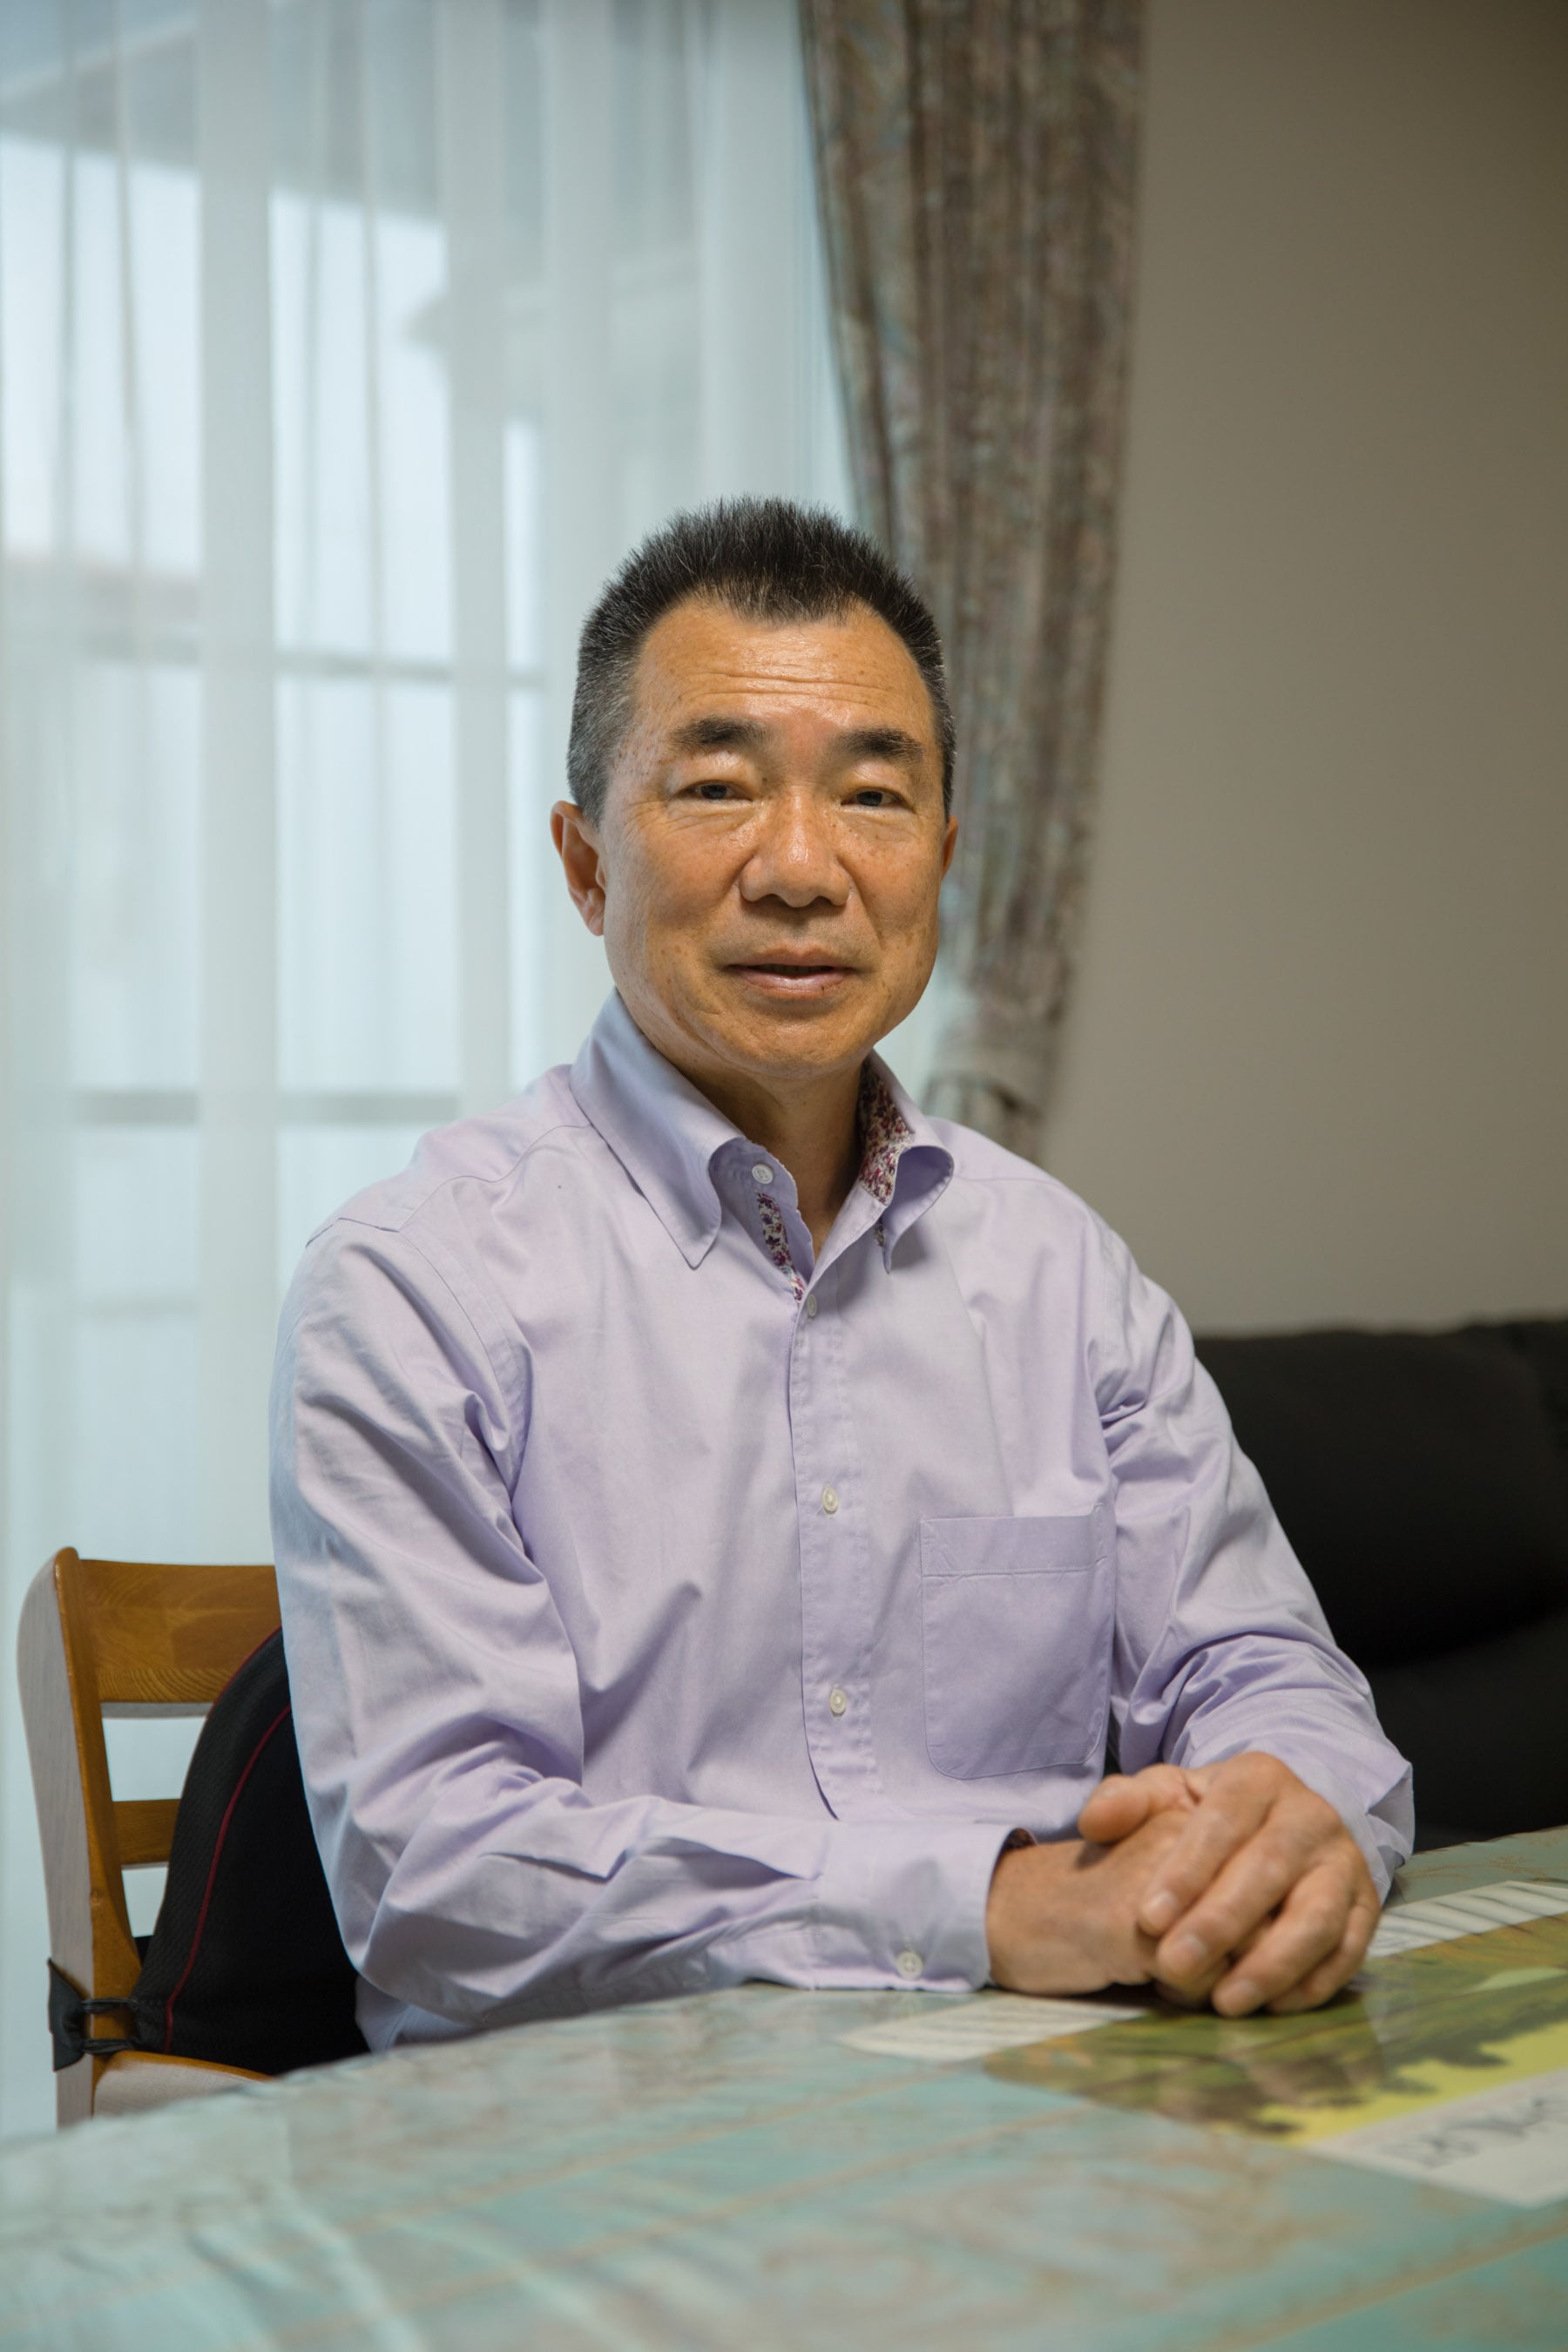 A photo of Mitsuyoshi Hirai, the former chief engineer of the Ocean Link. He sits at a table, his hands folded on a chart.